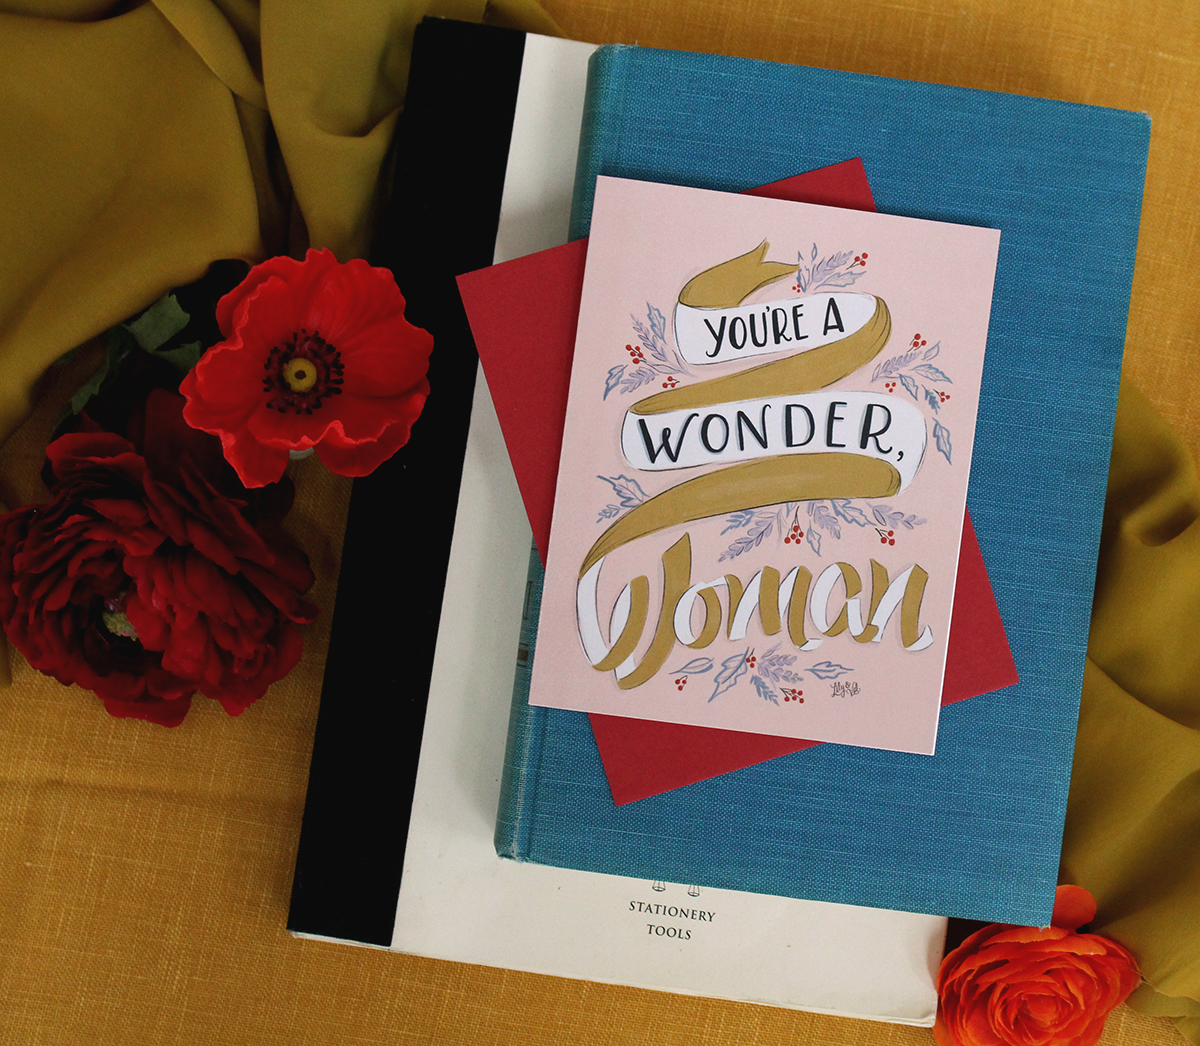 You are a Wonder, Woman. Card for Galentine's Day!